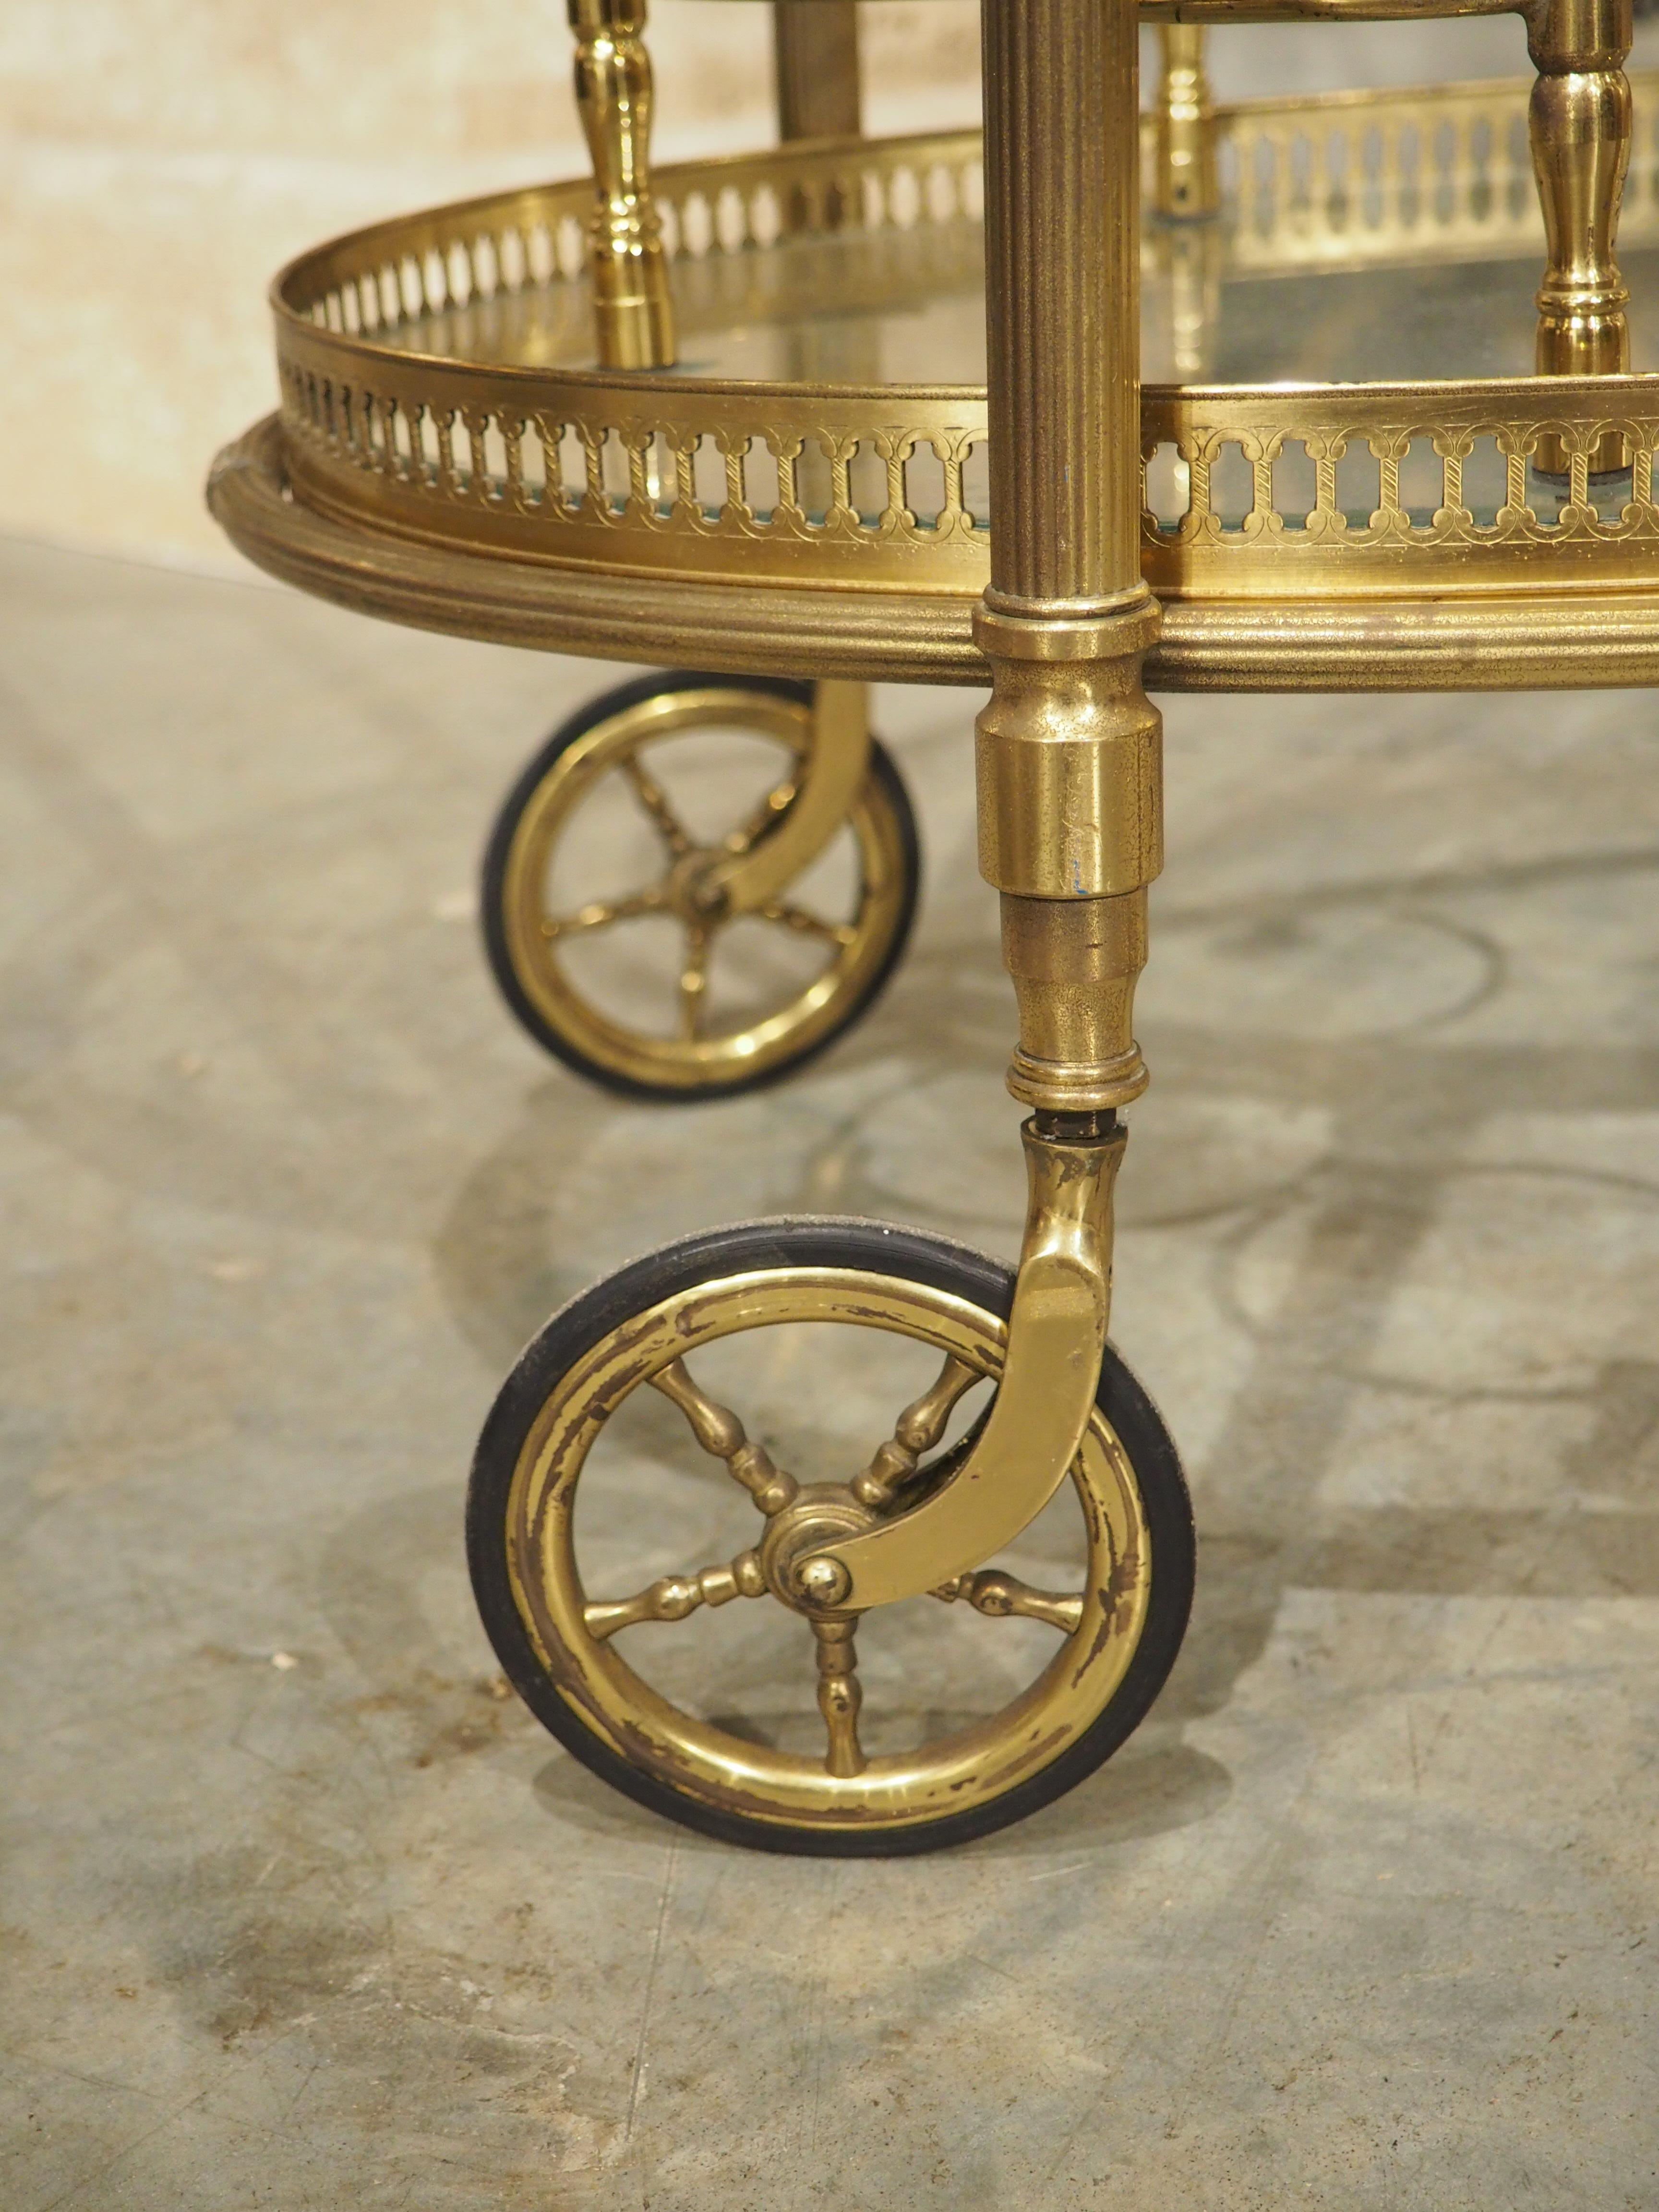 Attributed to Maison Baguès in Paris, this functional bar cart features two tiers of glass set inside a gilded brass frame. Beaded handles on the removable top tier allow the 14 W x 26 7/8 tray to be used for drink service. The bottom tier has three